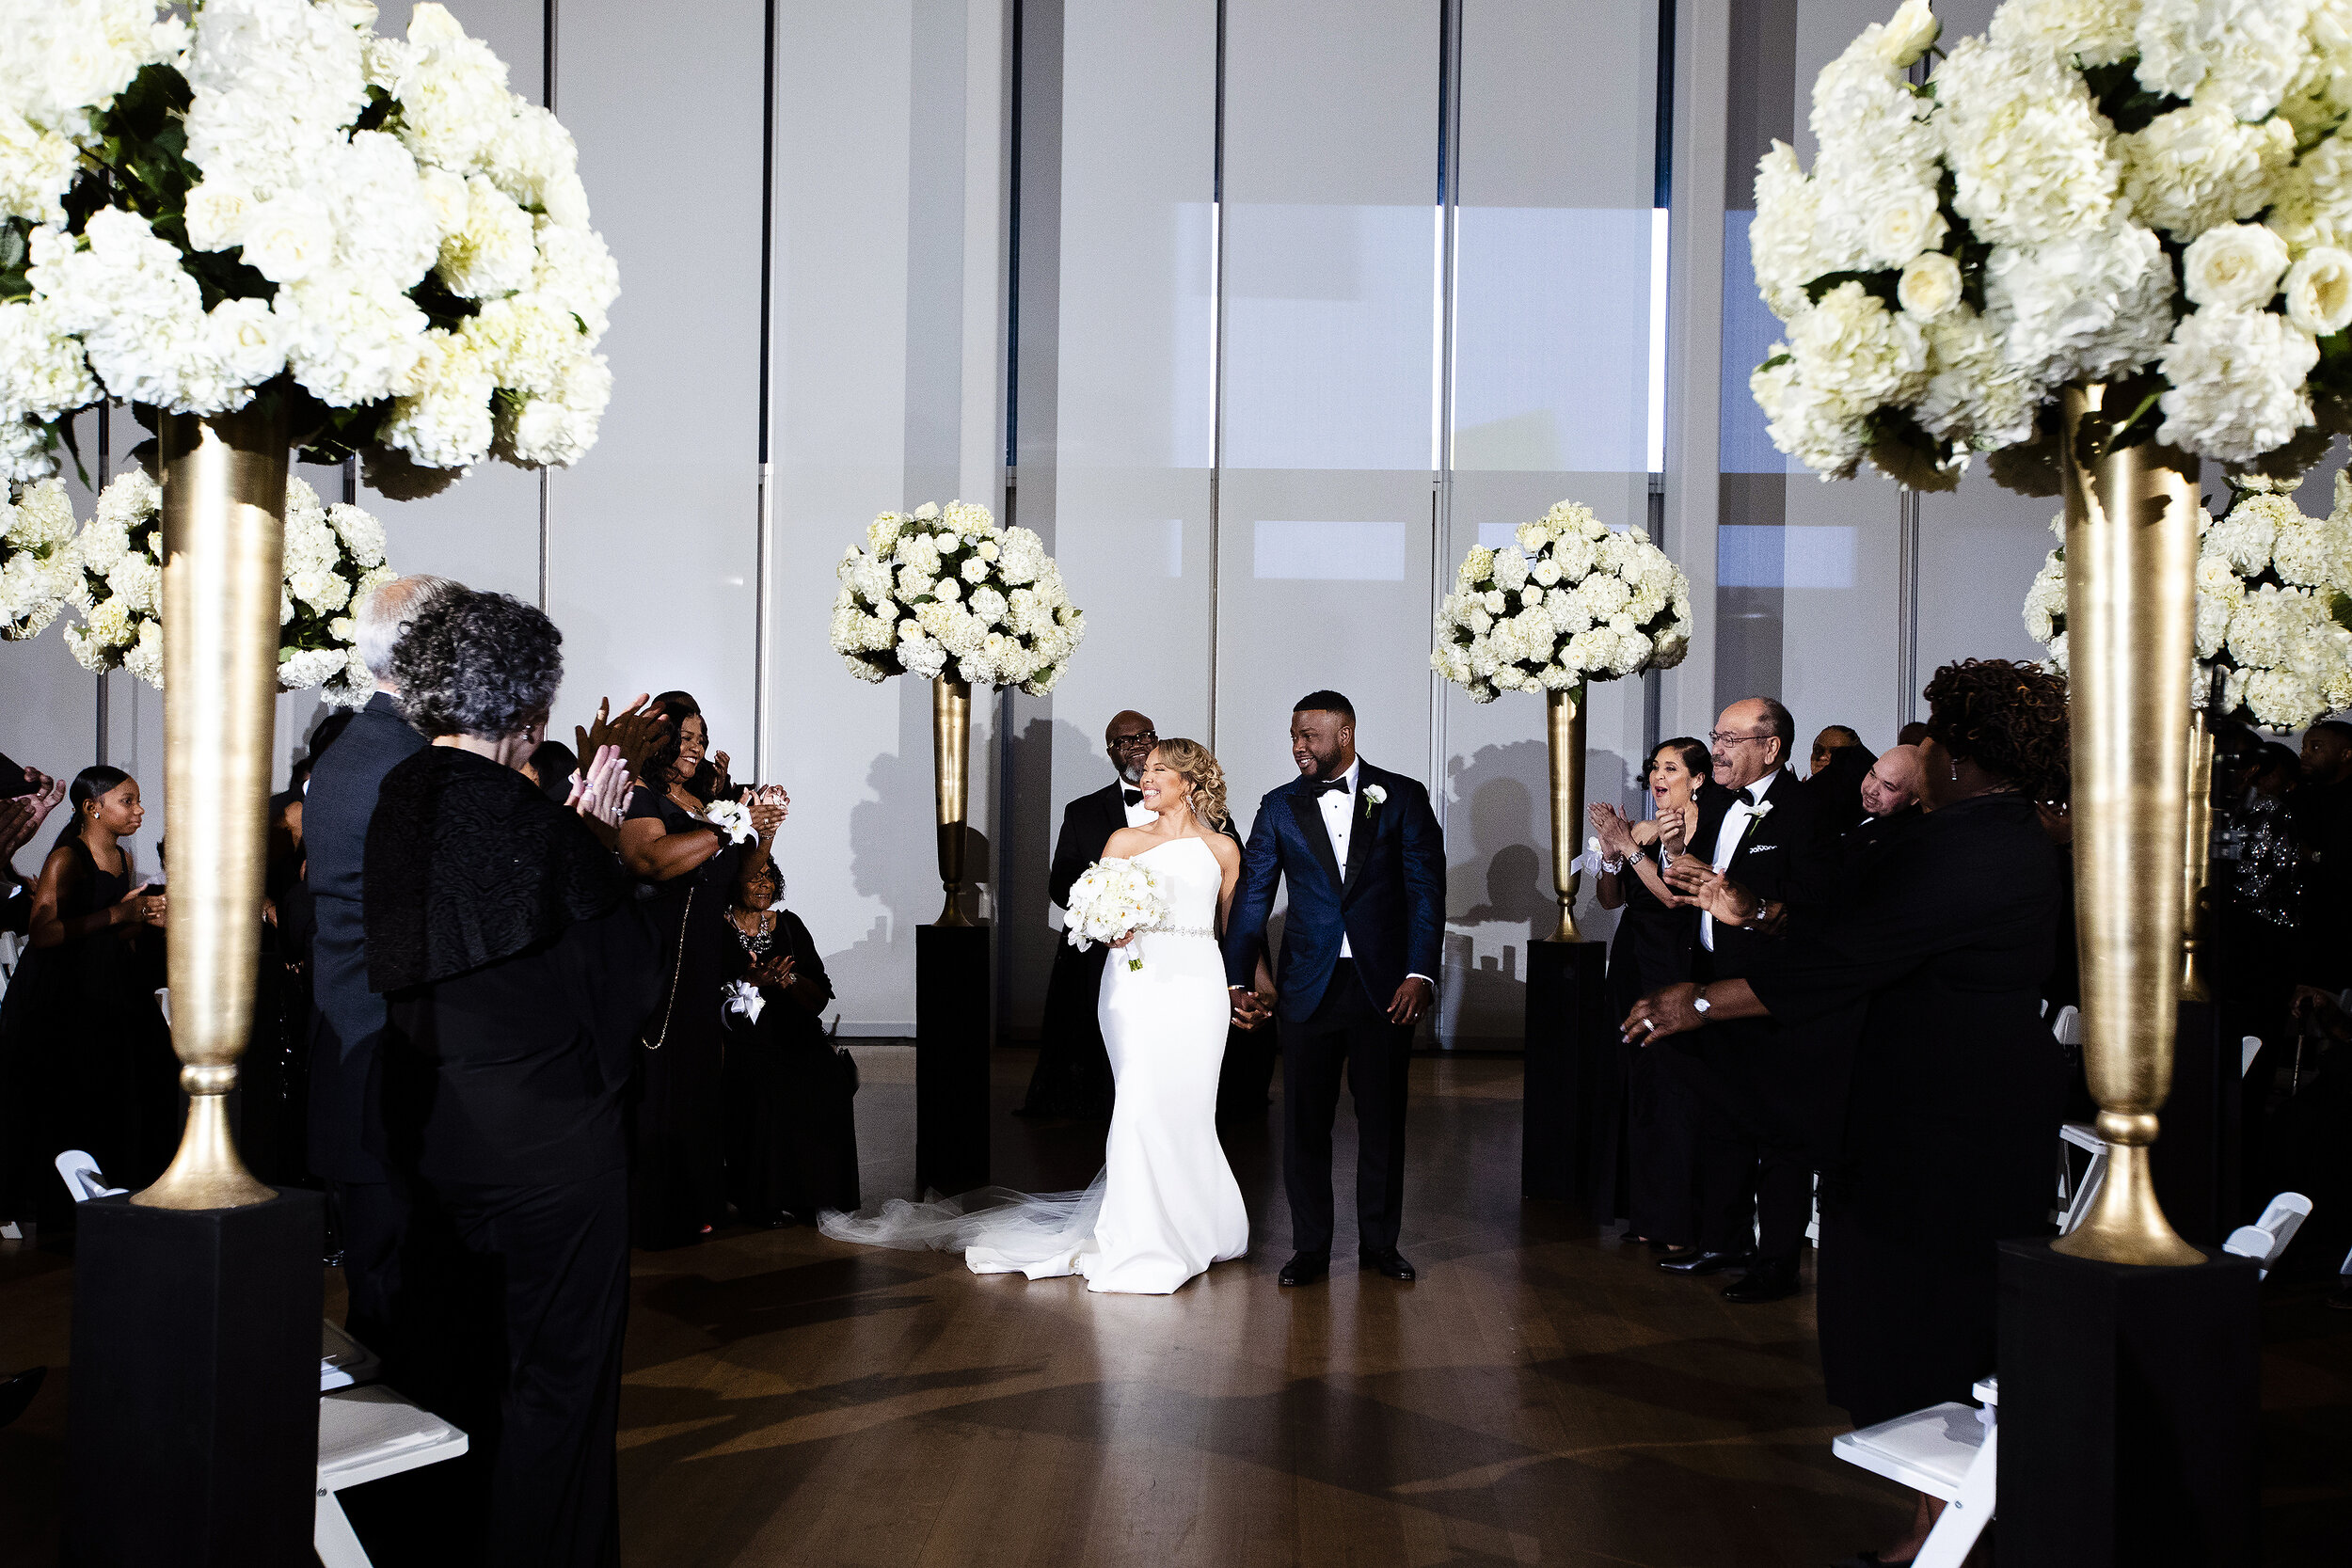  Romantic Night Wedding at The Mint Museum Uptown Charlotte NC 